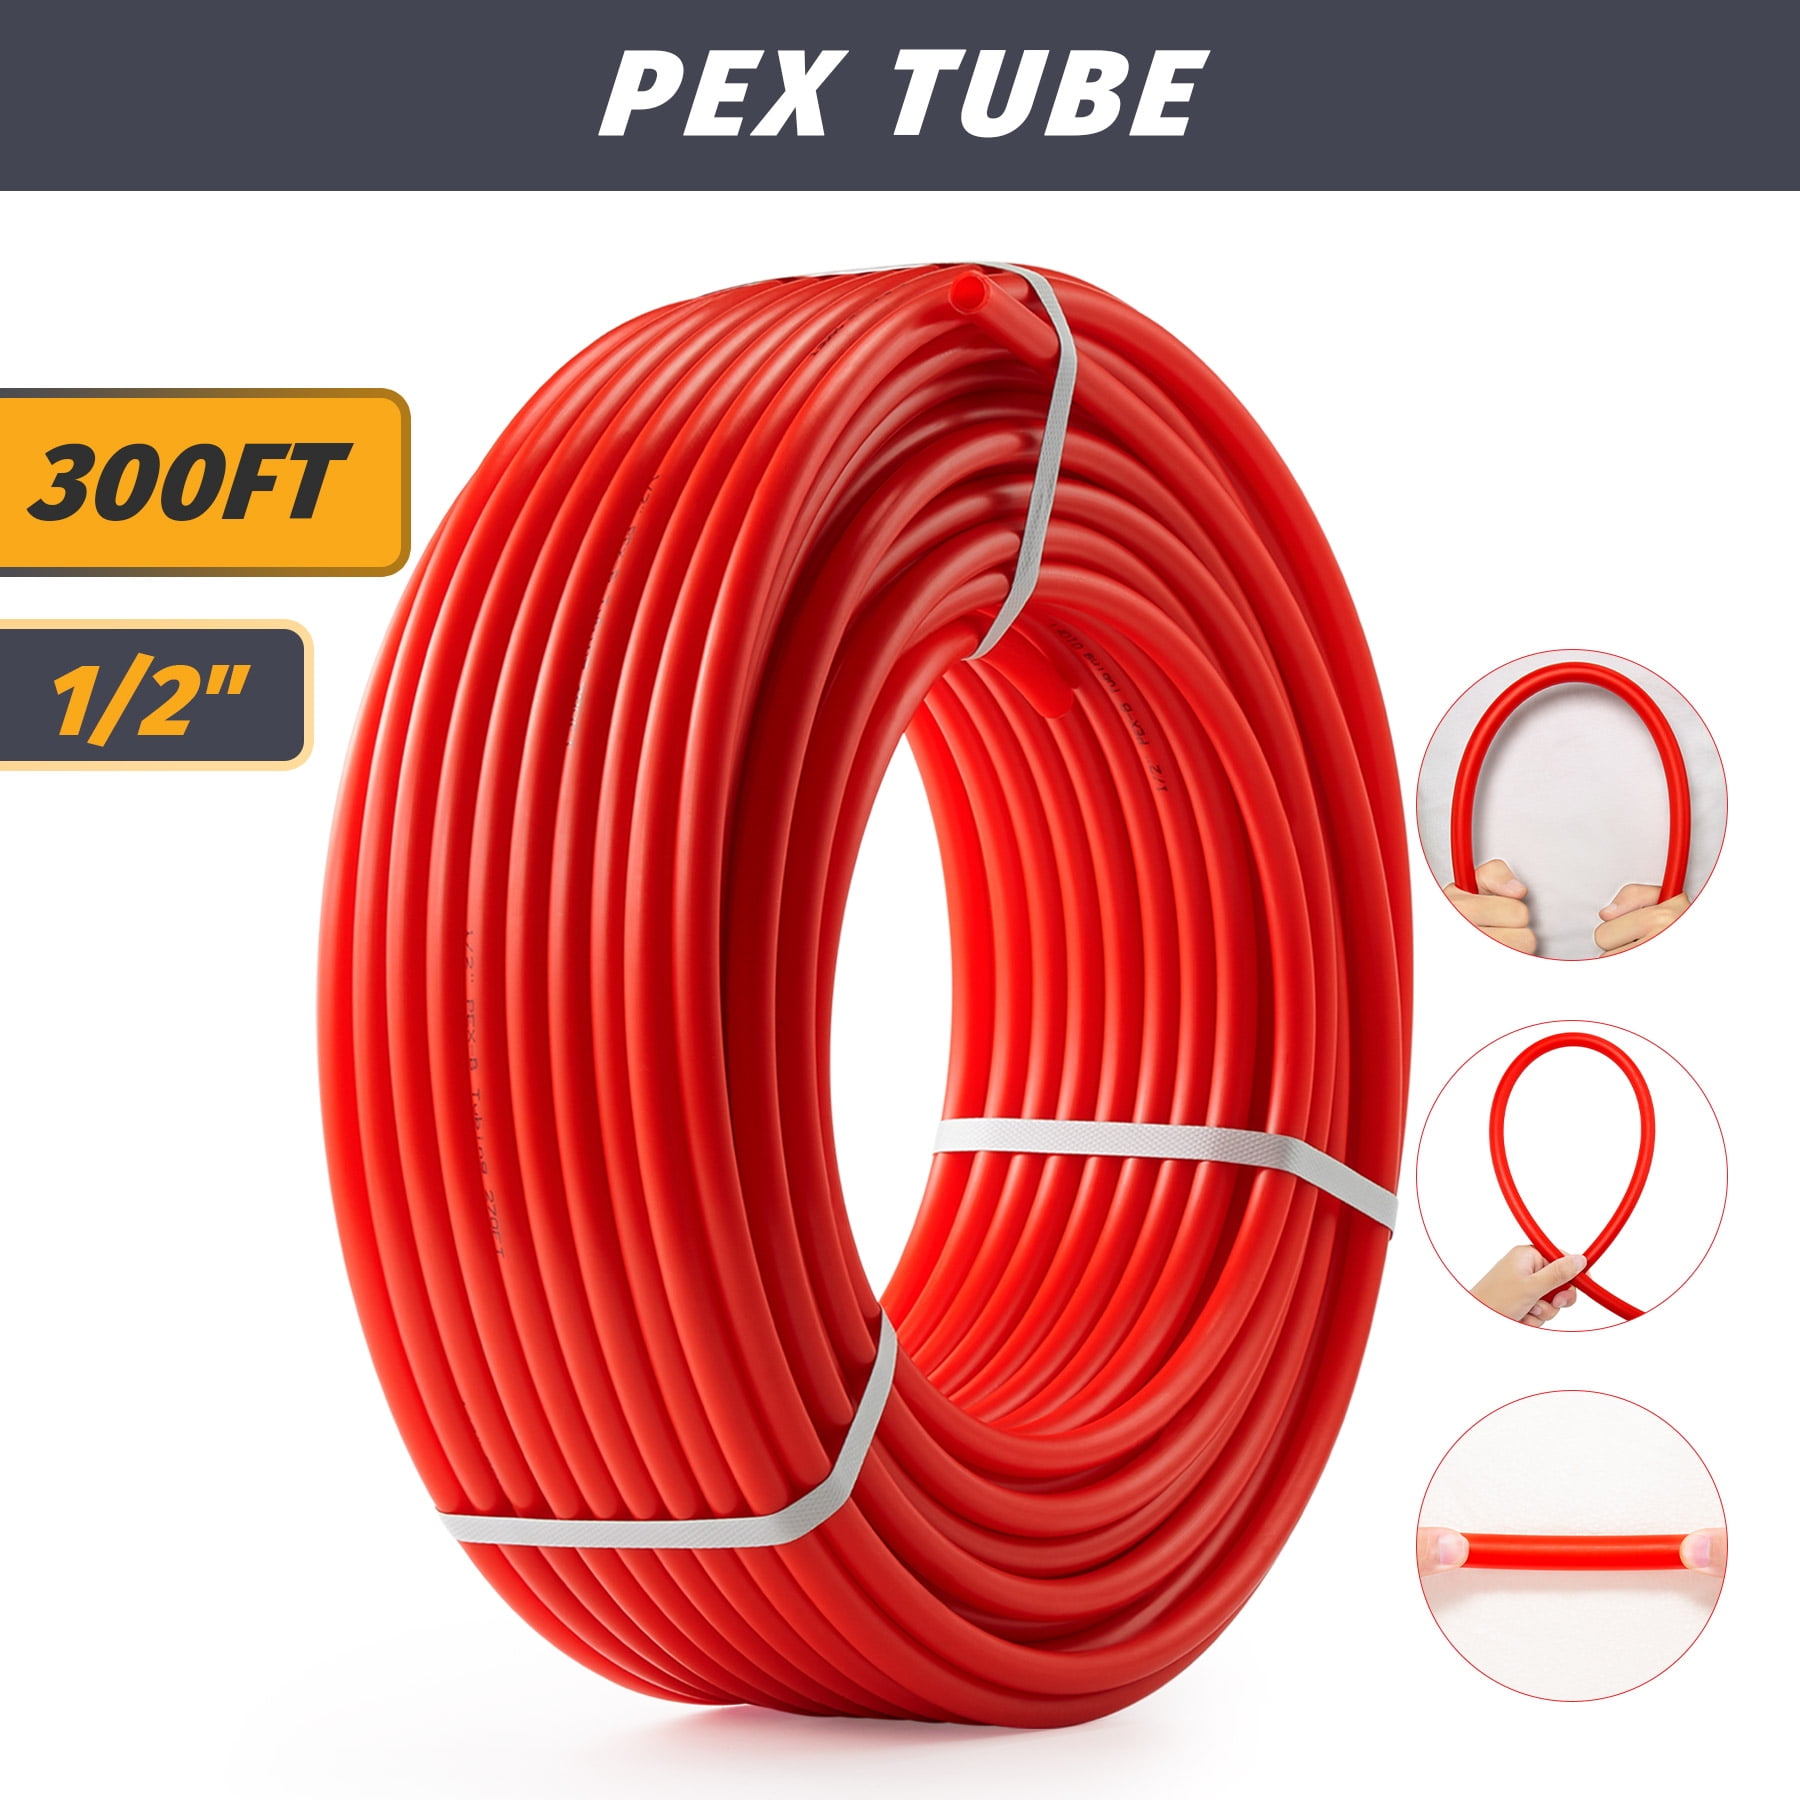 Happybuy Oxygen O2 Barrier PEX Tubing EVOH PEX-B Pipe for Residential Commercial Radiant Floor Heating Hot Cold Water Plumbing PEX Tubing 2 X 300Ft 2 Rolls of 1/2 inch X 300 Feet Tube Coil